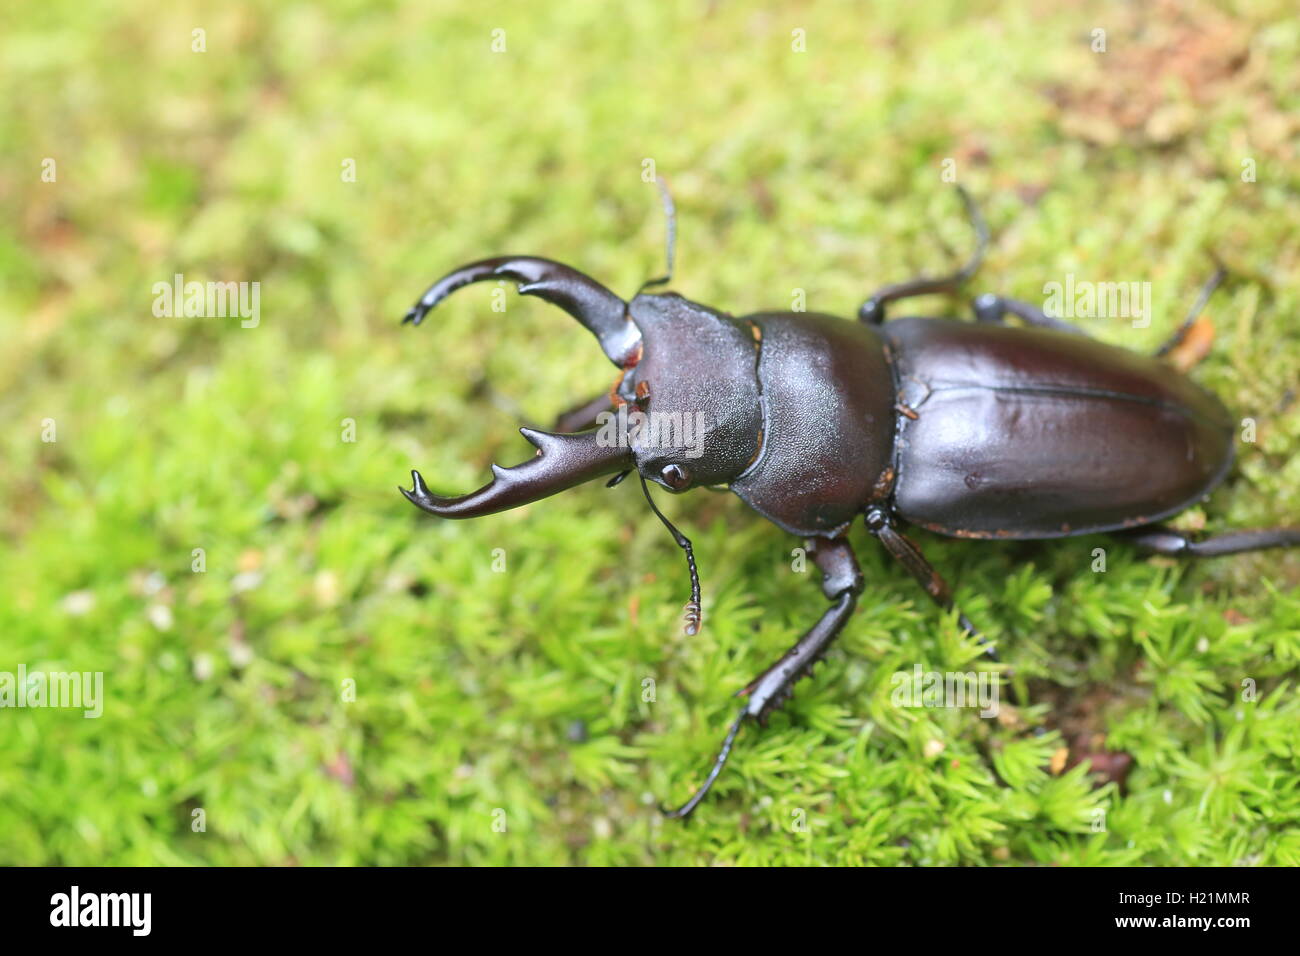 Kirchnerius guangxii stag beetle in China Stock Photo